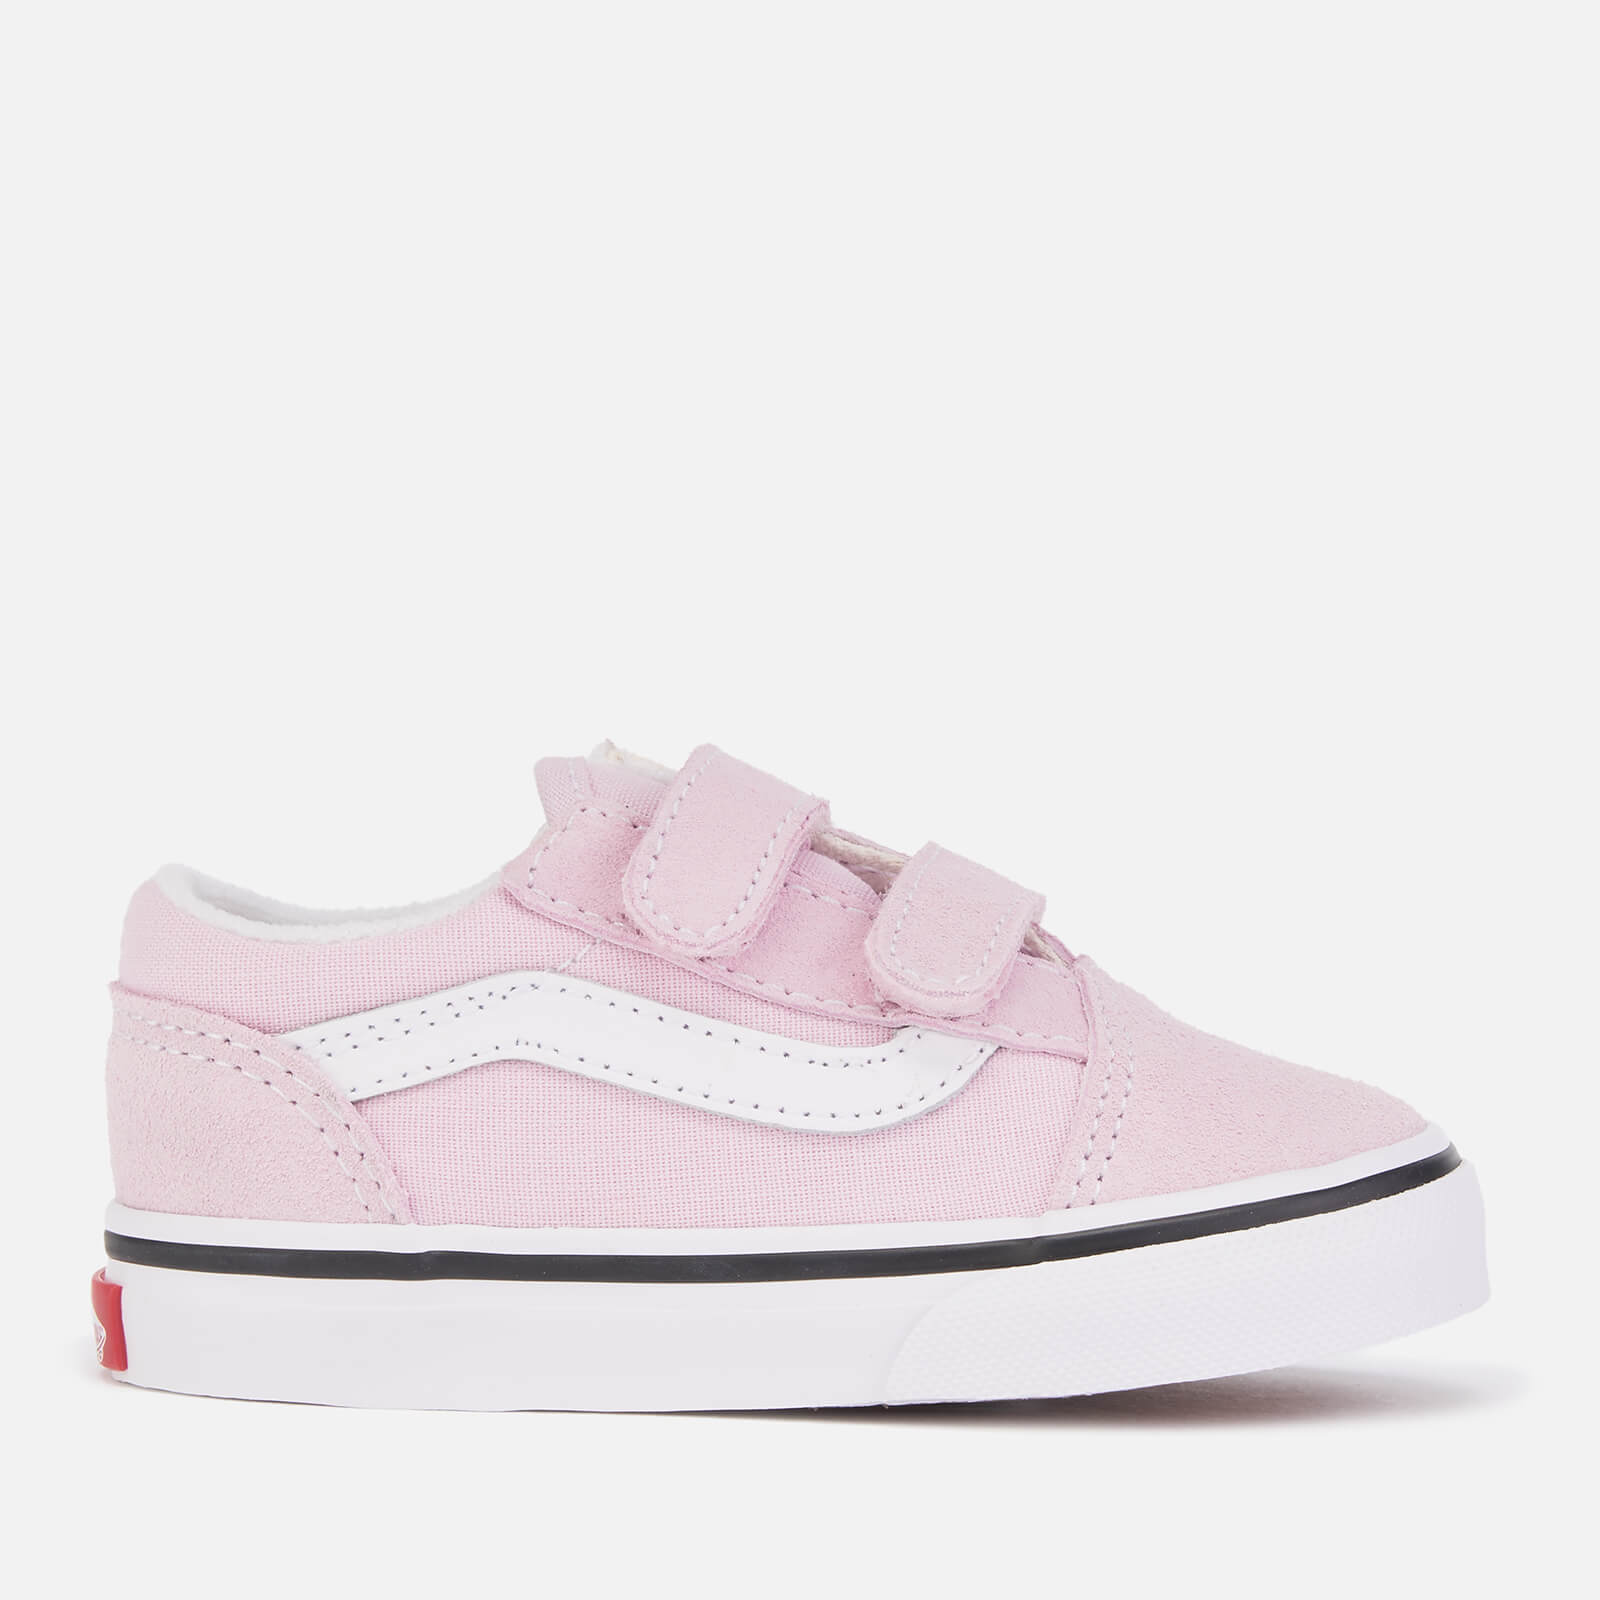 Vans Toddlers' Old Skool Velcro Trainers - Lilac Snow/True White - UK 4 Toddler